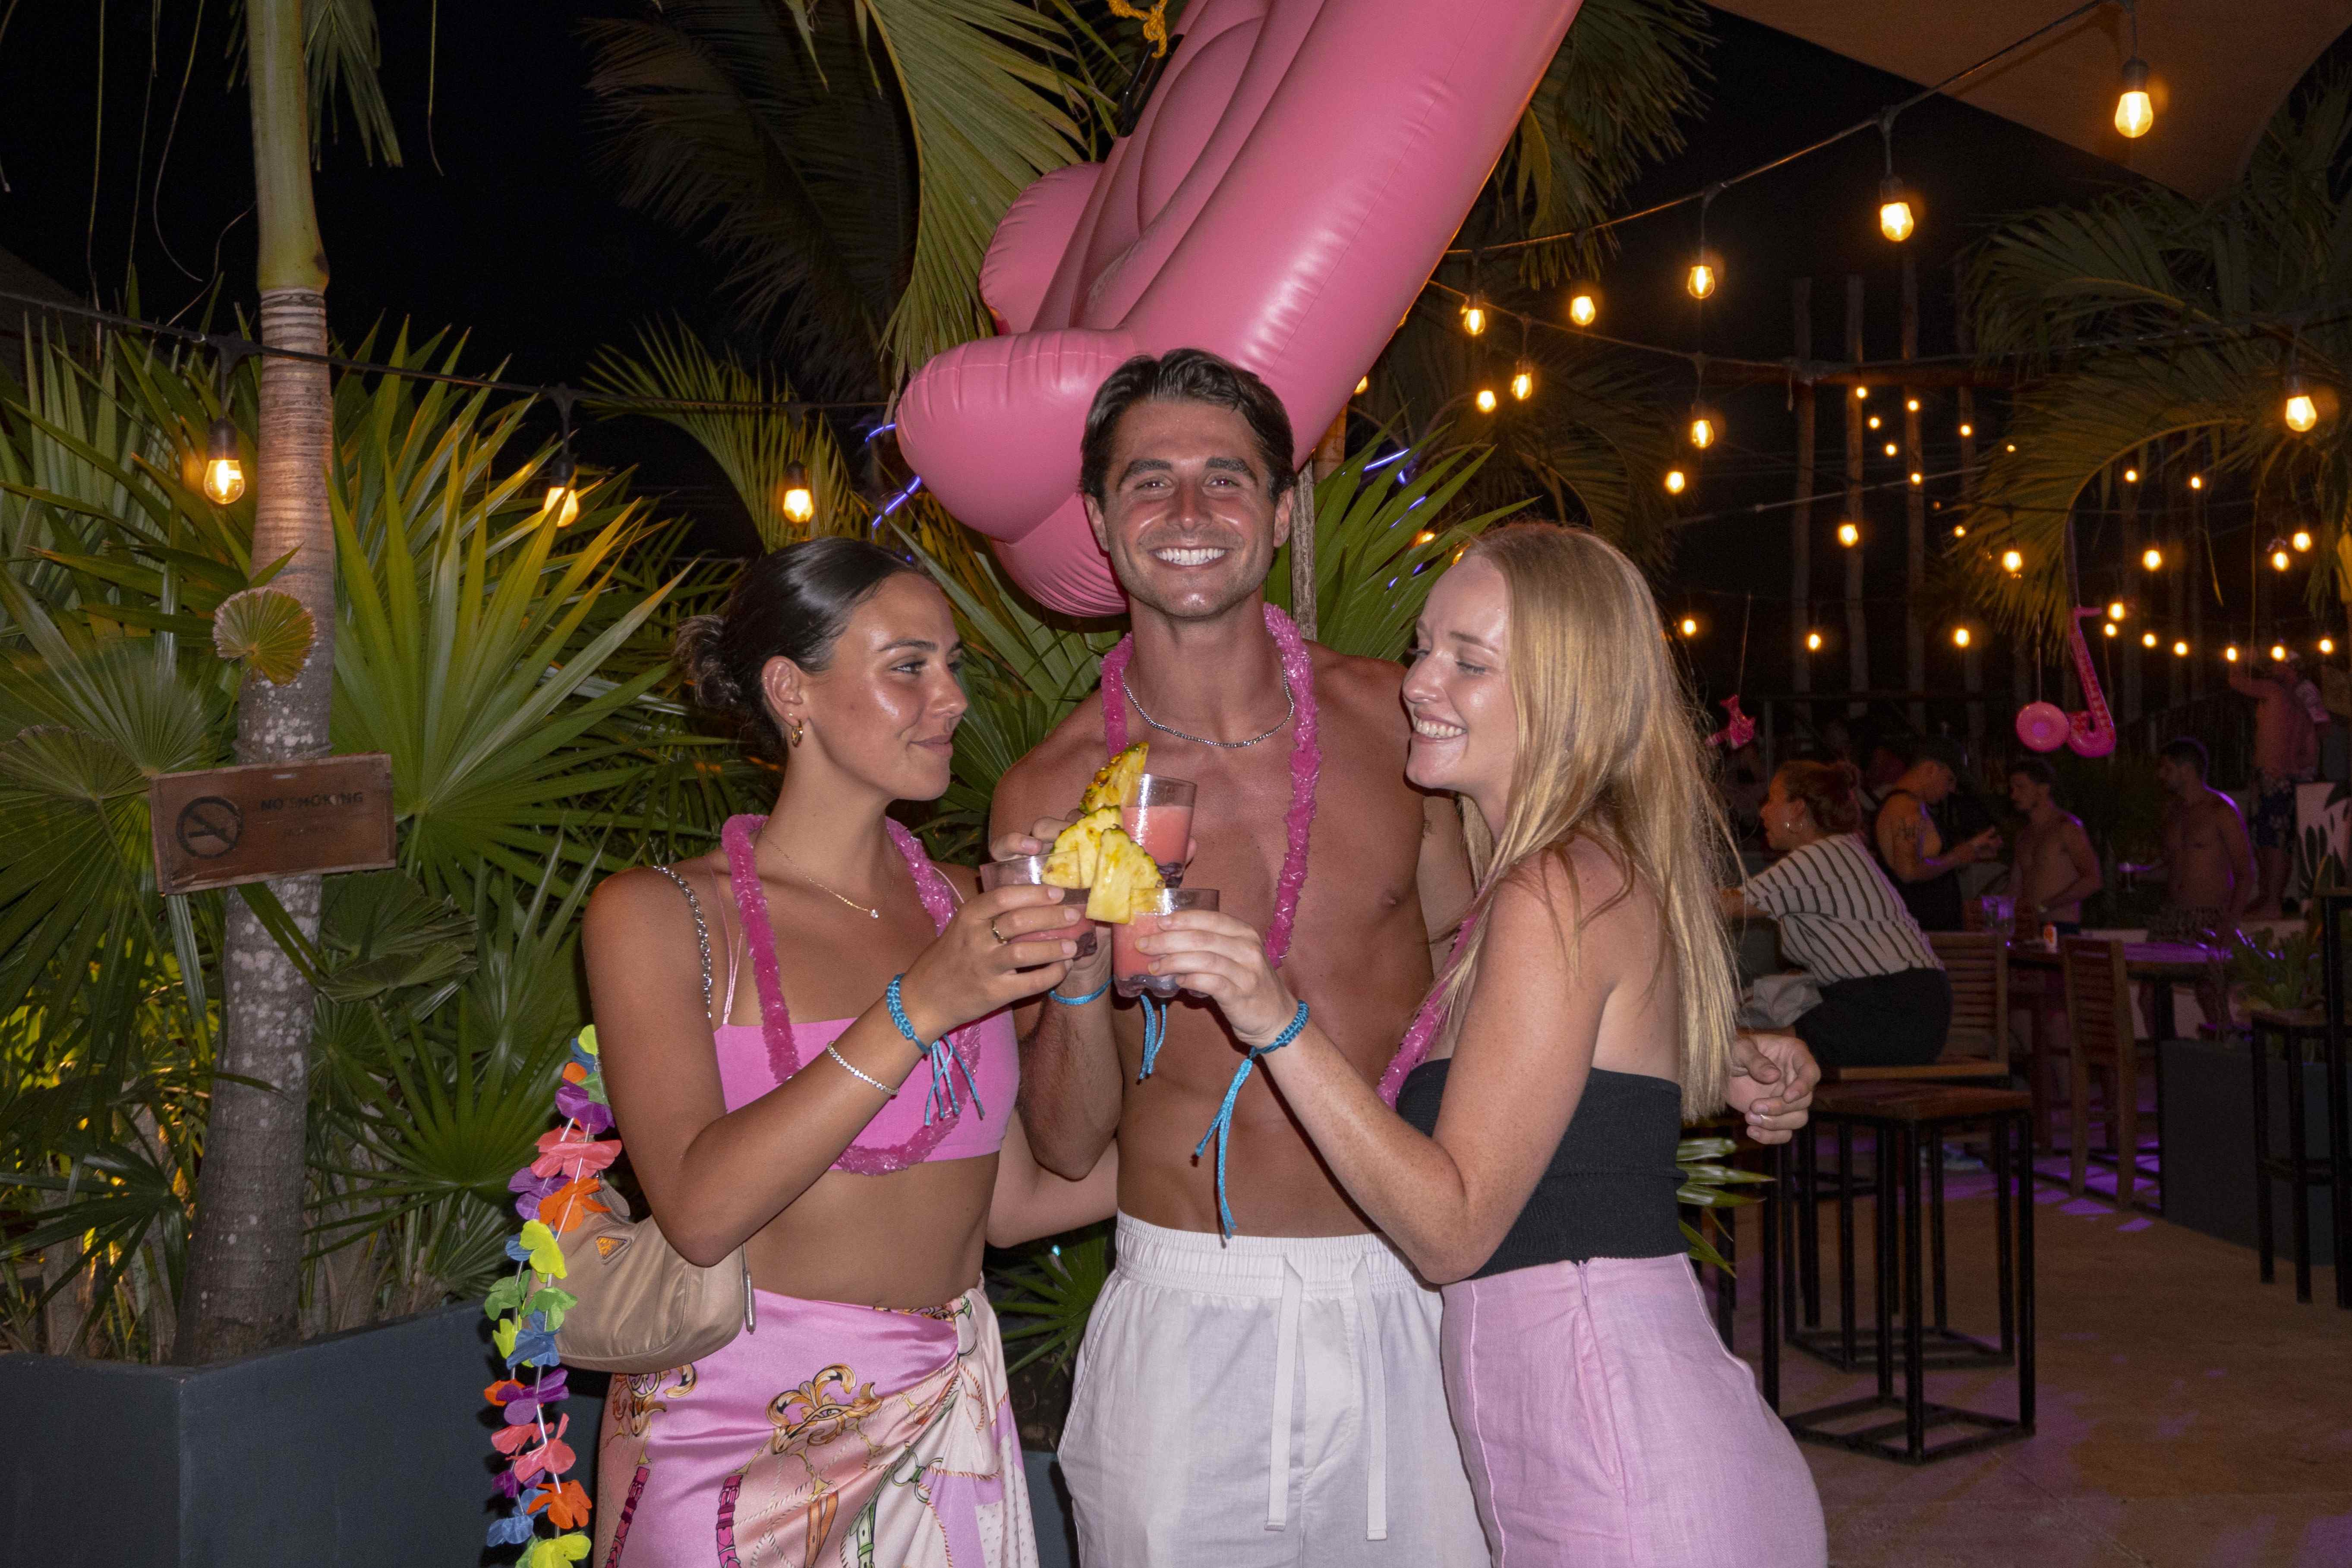 Barbie, Barbie Mania, Dreamland, Tulum, Pink Party, Pink, Party, Tuluminati, Glamour, Jungle Party, Drinks, Style, Fashion, Pool Party, Mayan Monkey, Mayan Monkey Tulum, Barbie, Ken, Barbie The Movie, Barbie Theme Party, Instagrammable